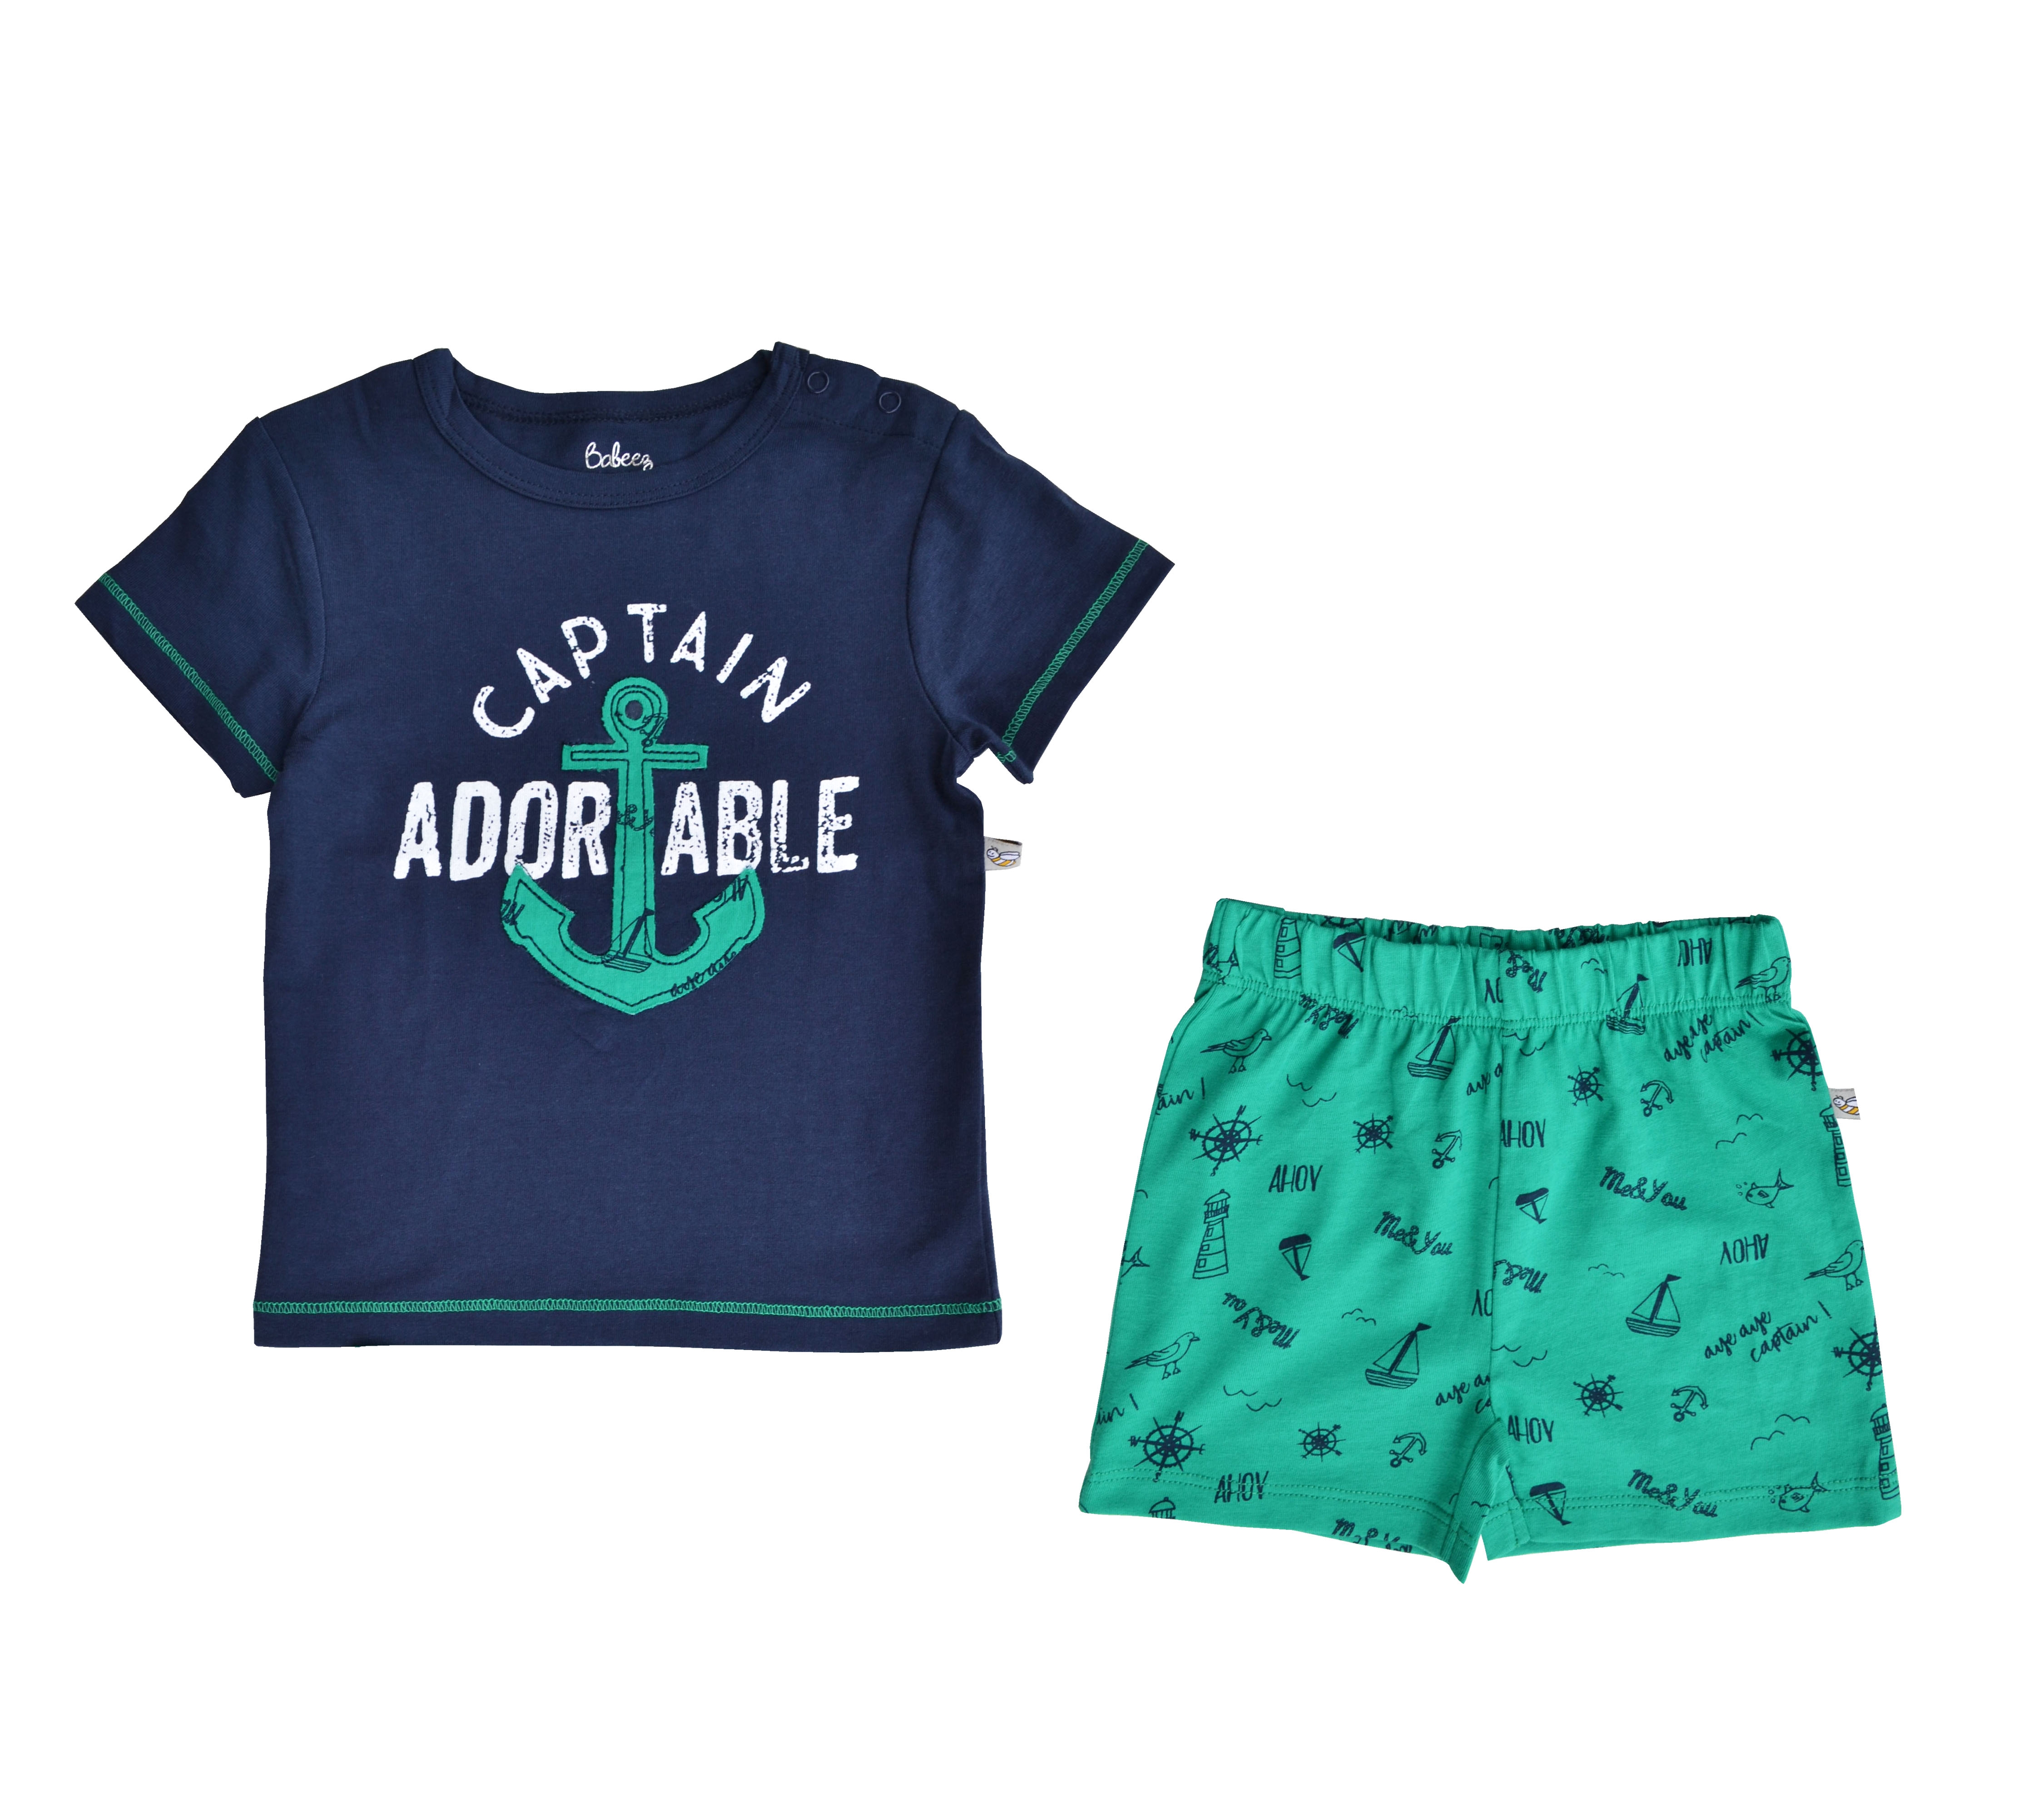 Babeez | Anchor Print Navy T-Shirt + Allover Print Green Shorty Set (100% Cotton Single Jersey) undefined